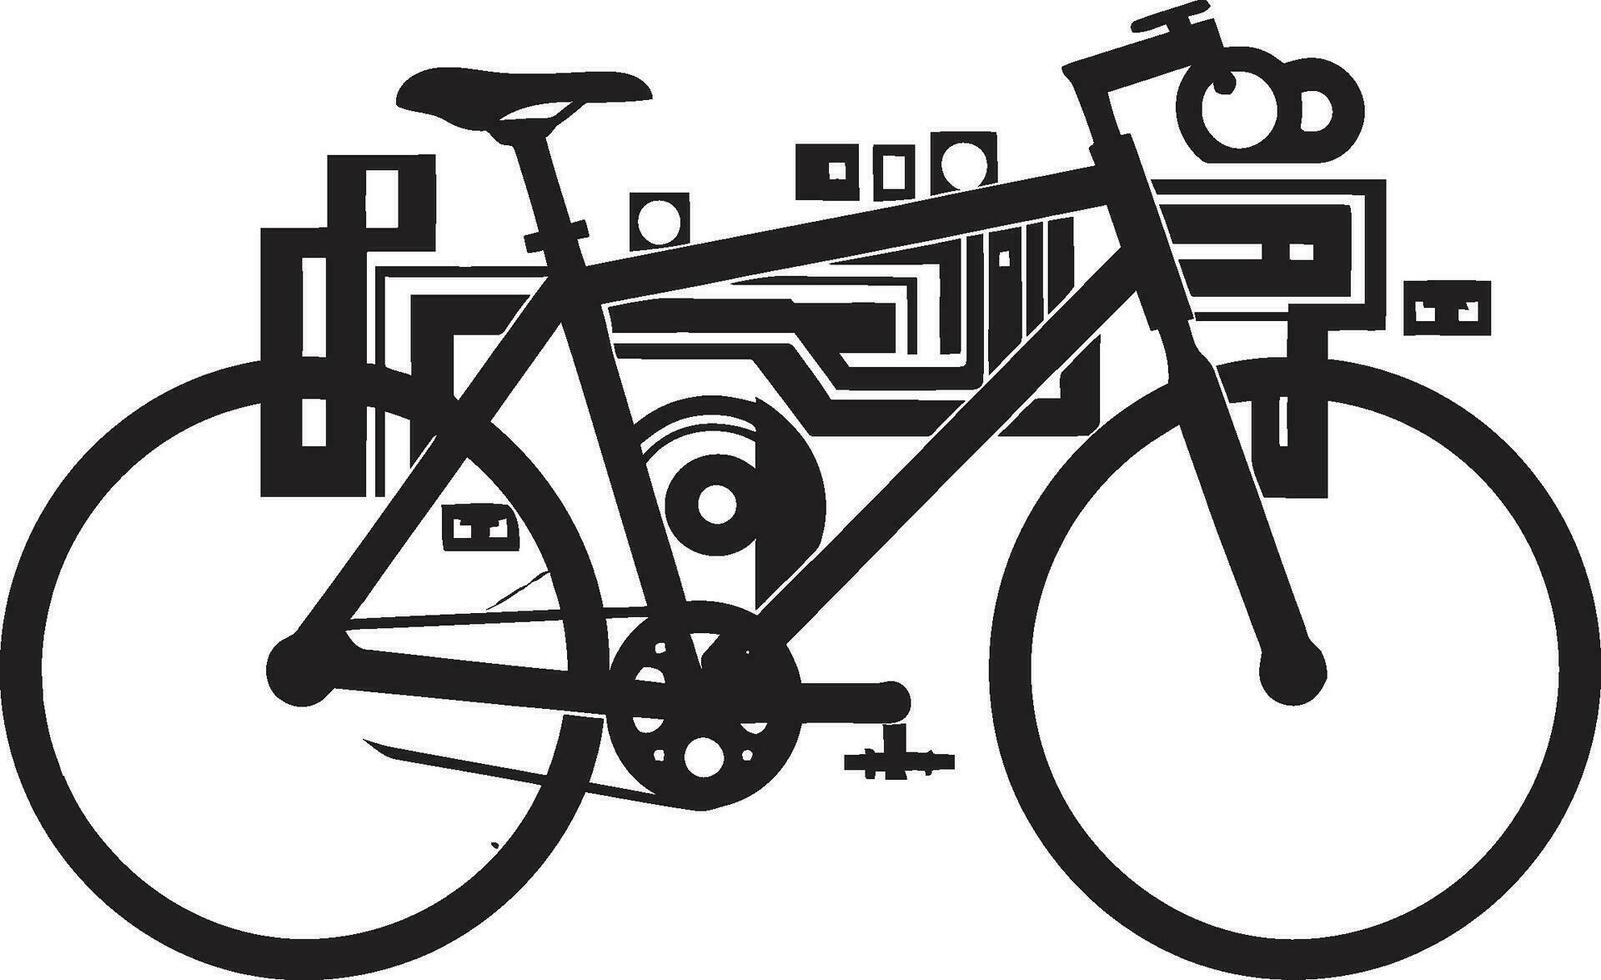 SleekCyclist Black Bicycle Emblem CycleRoute Iconic Bike Vector Design